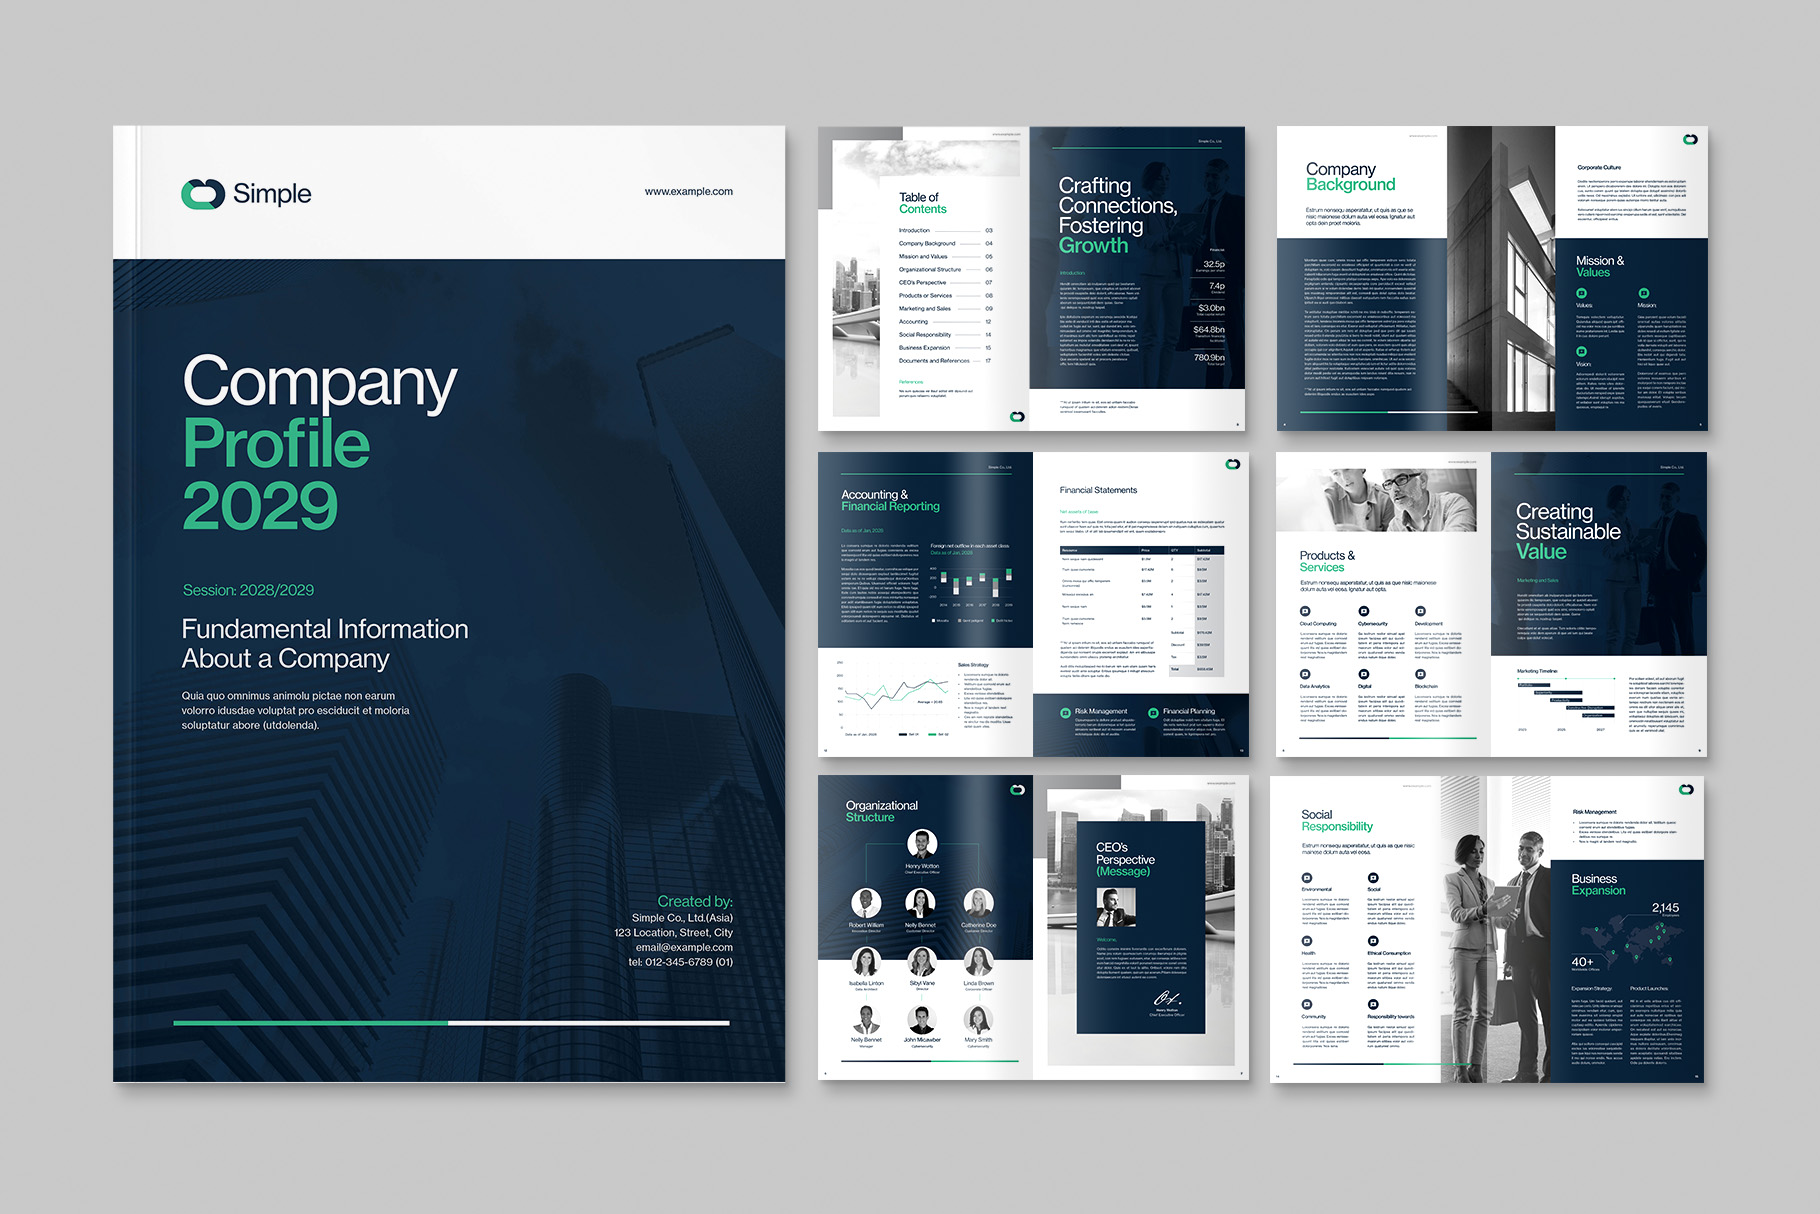 Company Profile Template in INDD format